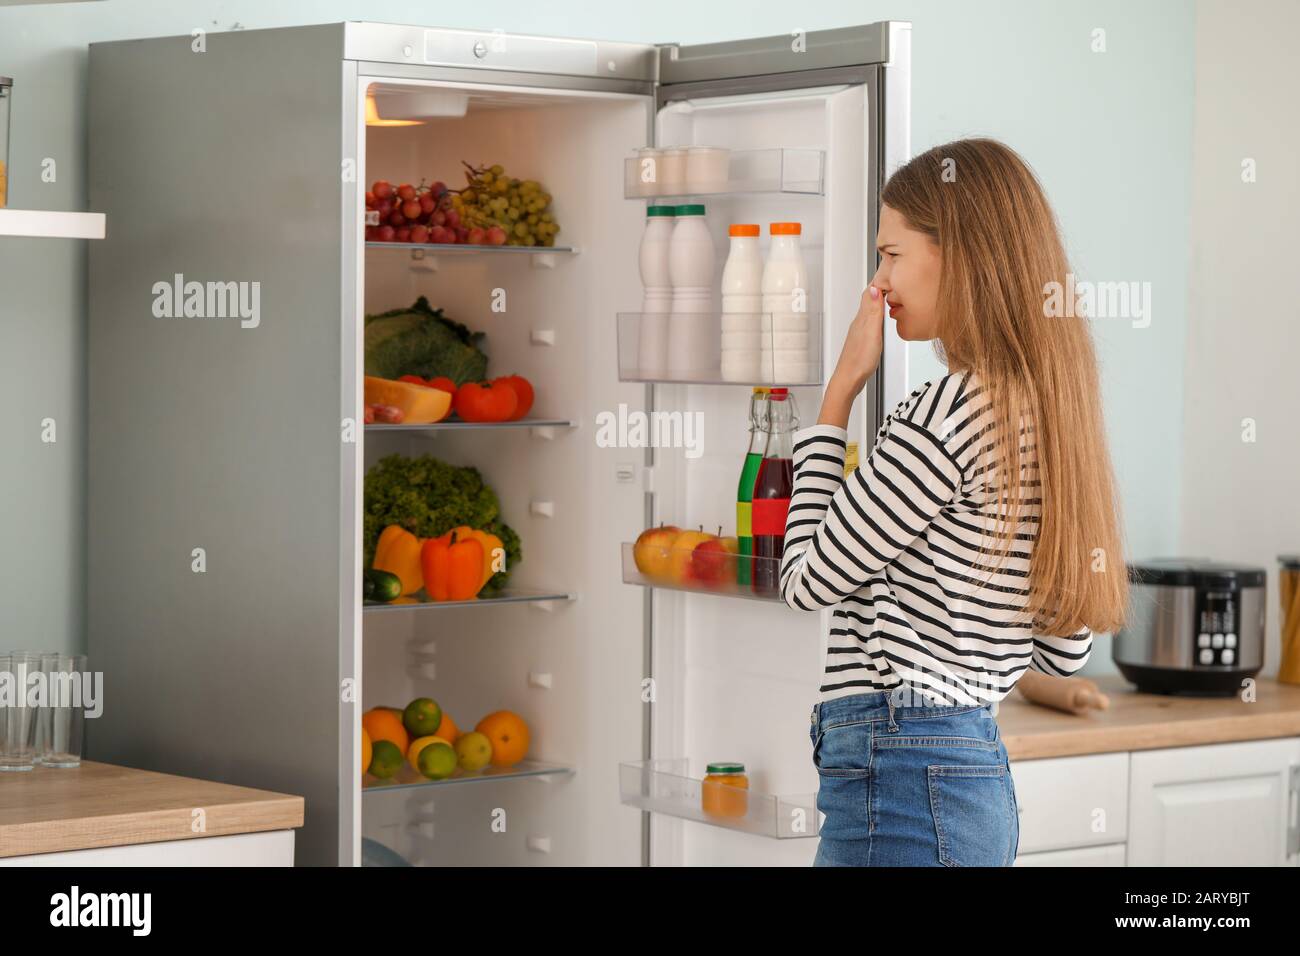 Woman feeling bad smell from fridge in kitchen Stock Photo